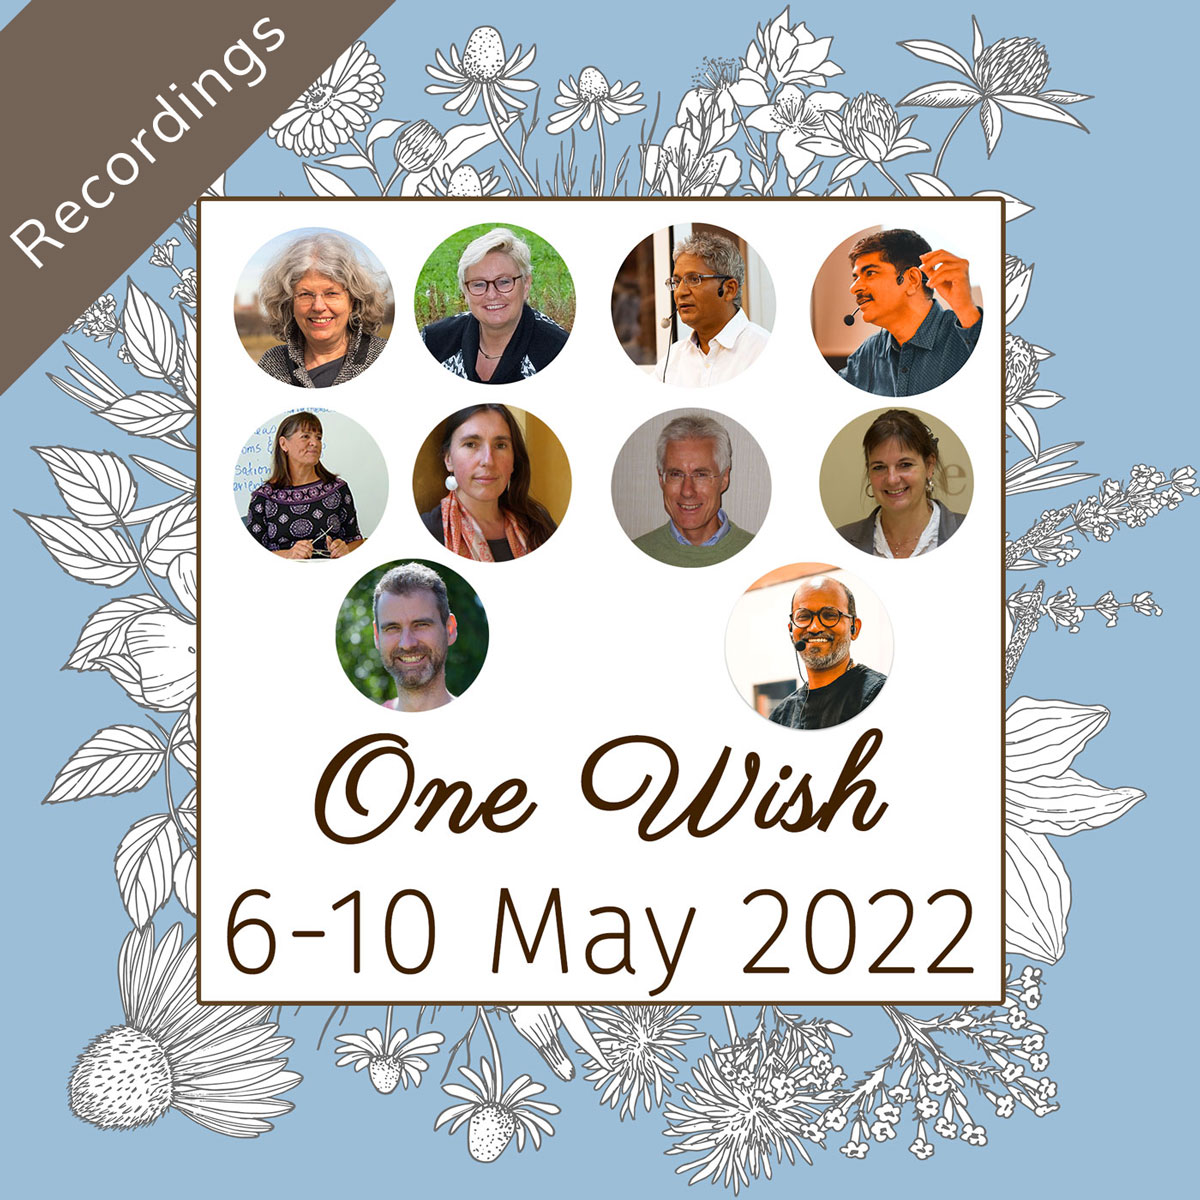 ONE WISH Conference 2022